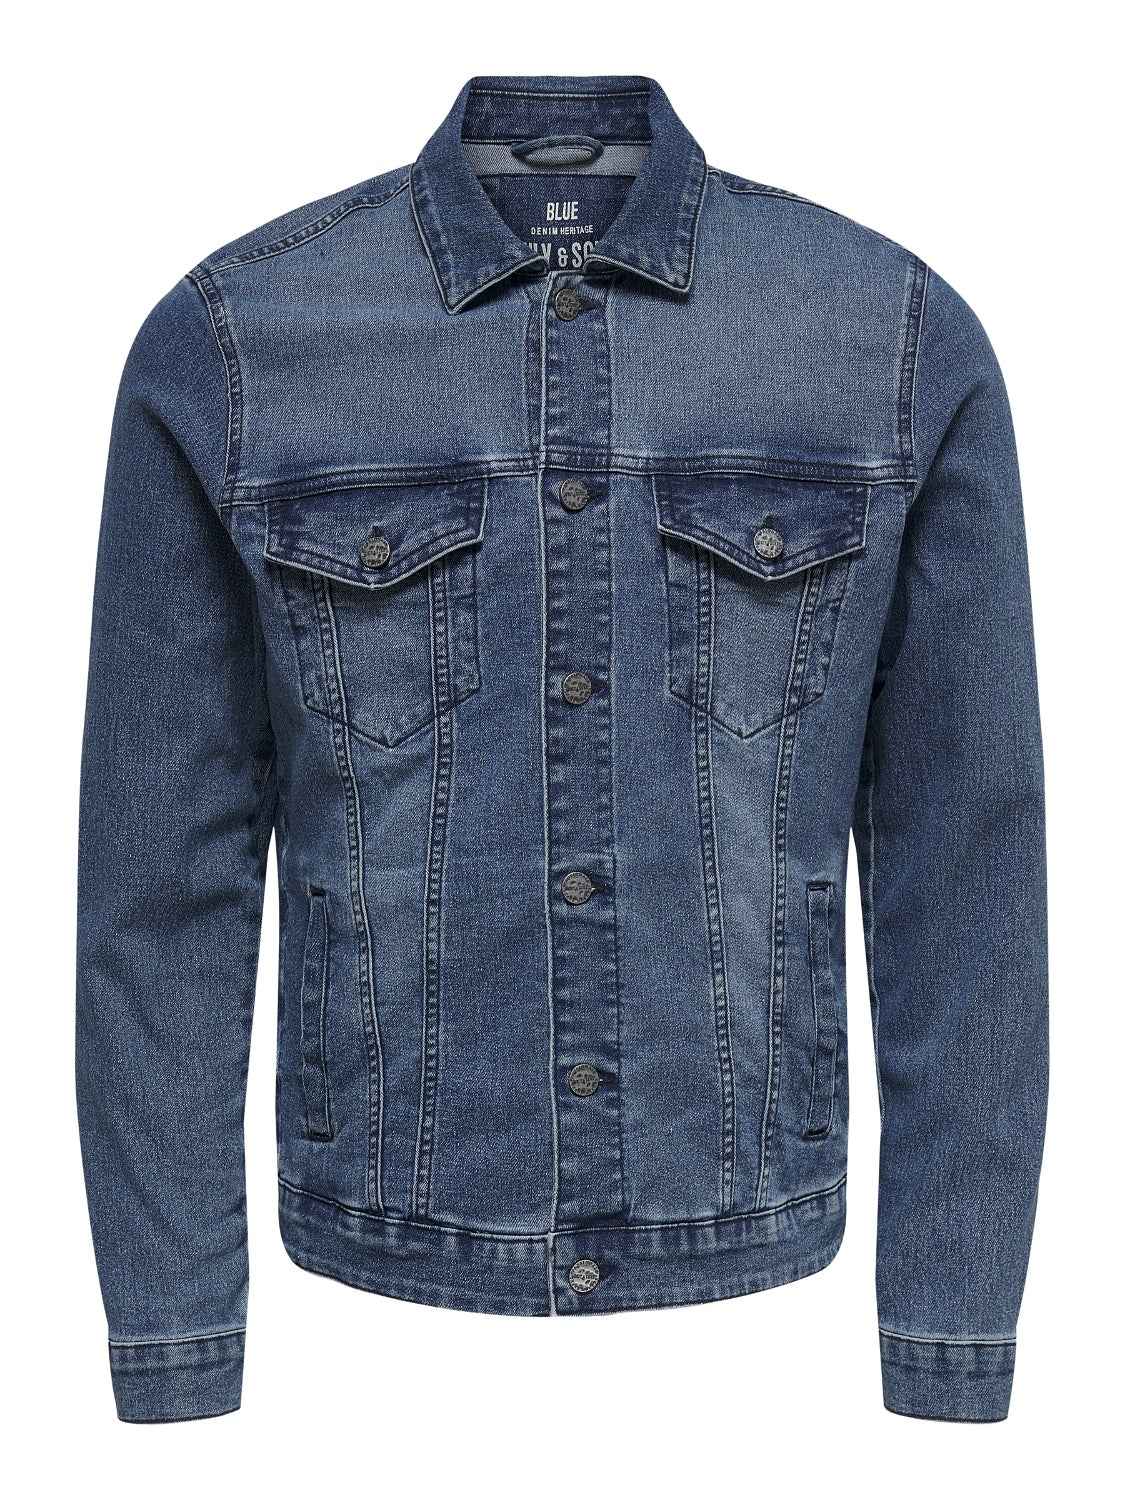 MODA UOMO Giacche Jeans ONLY & SONS Giacca di jeans ONLY & SONS sconto 82% Blu navy L 